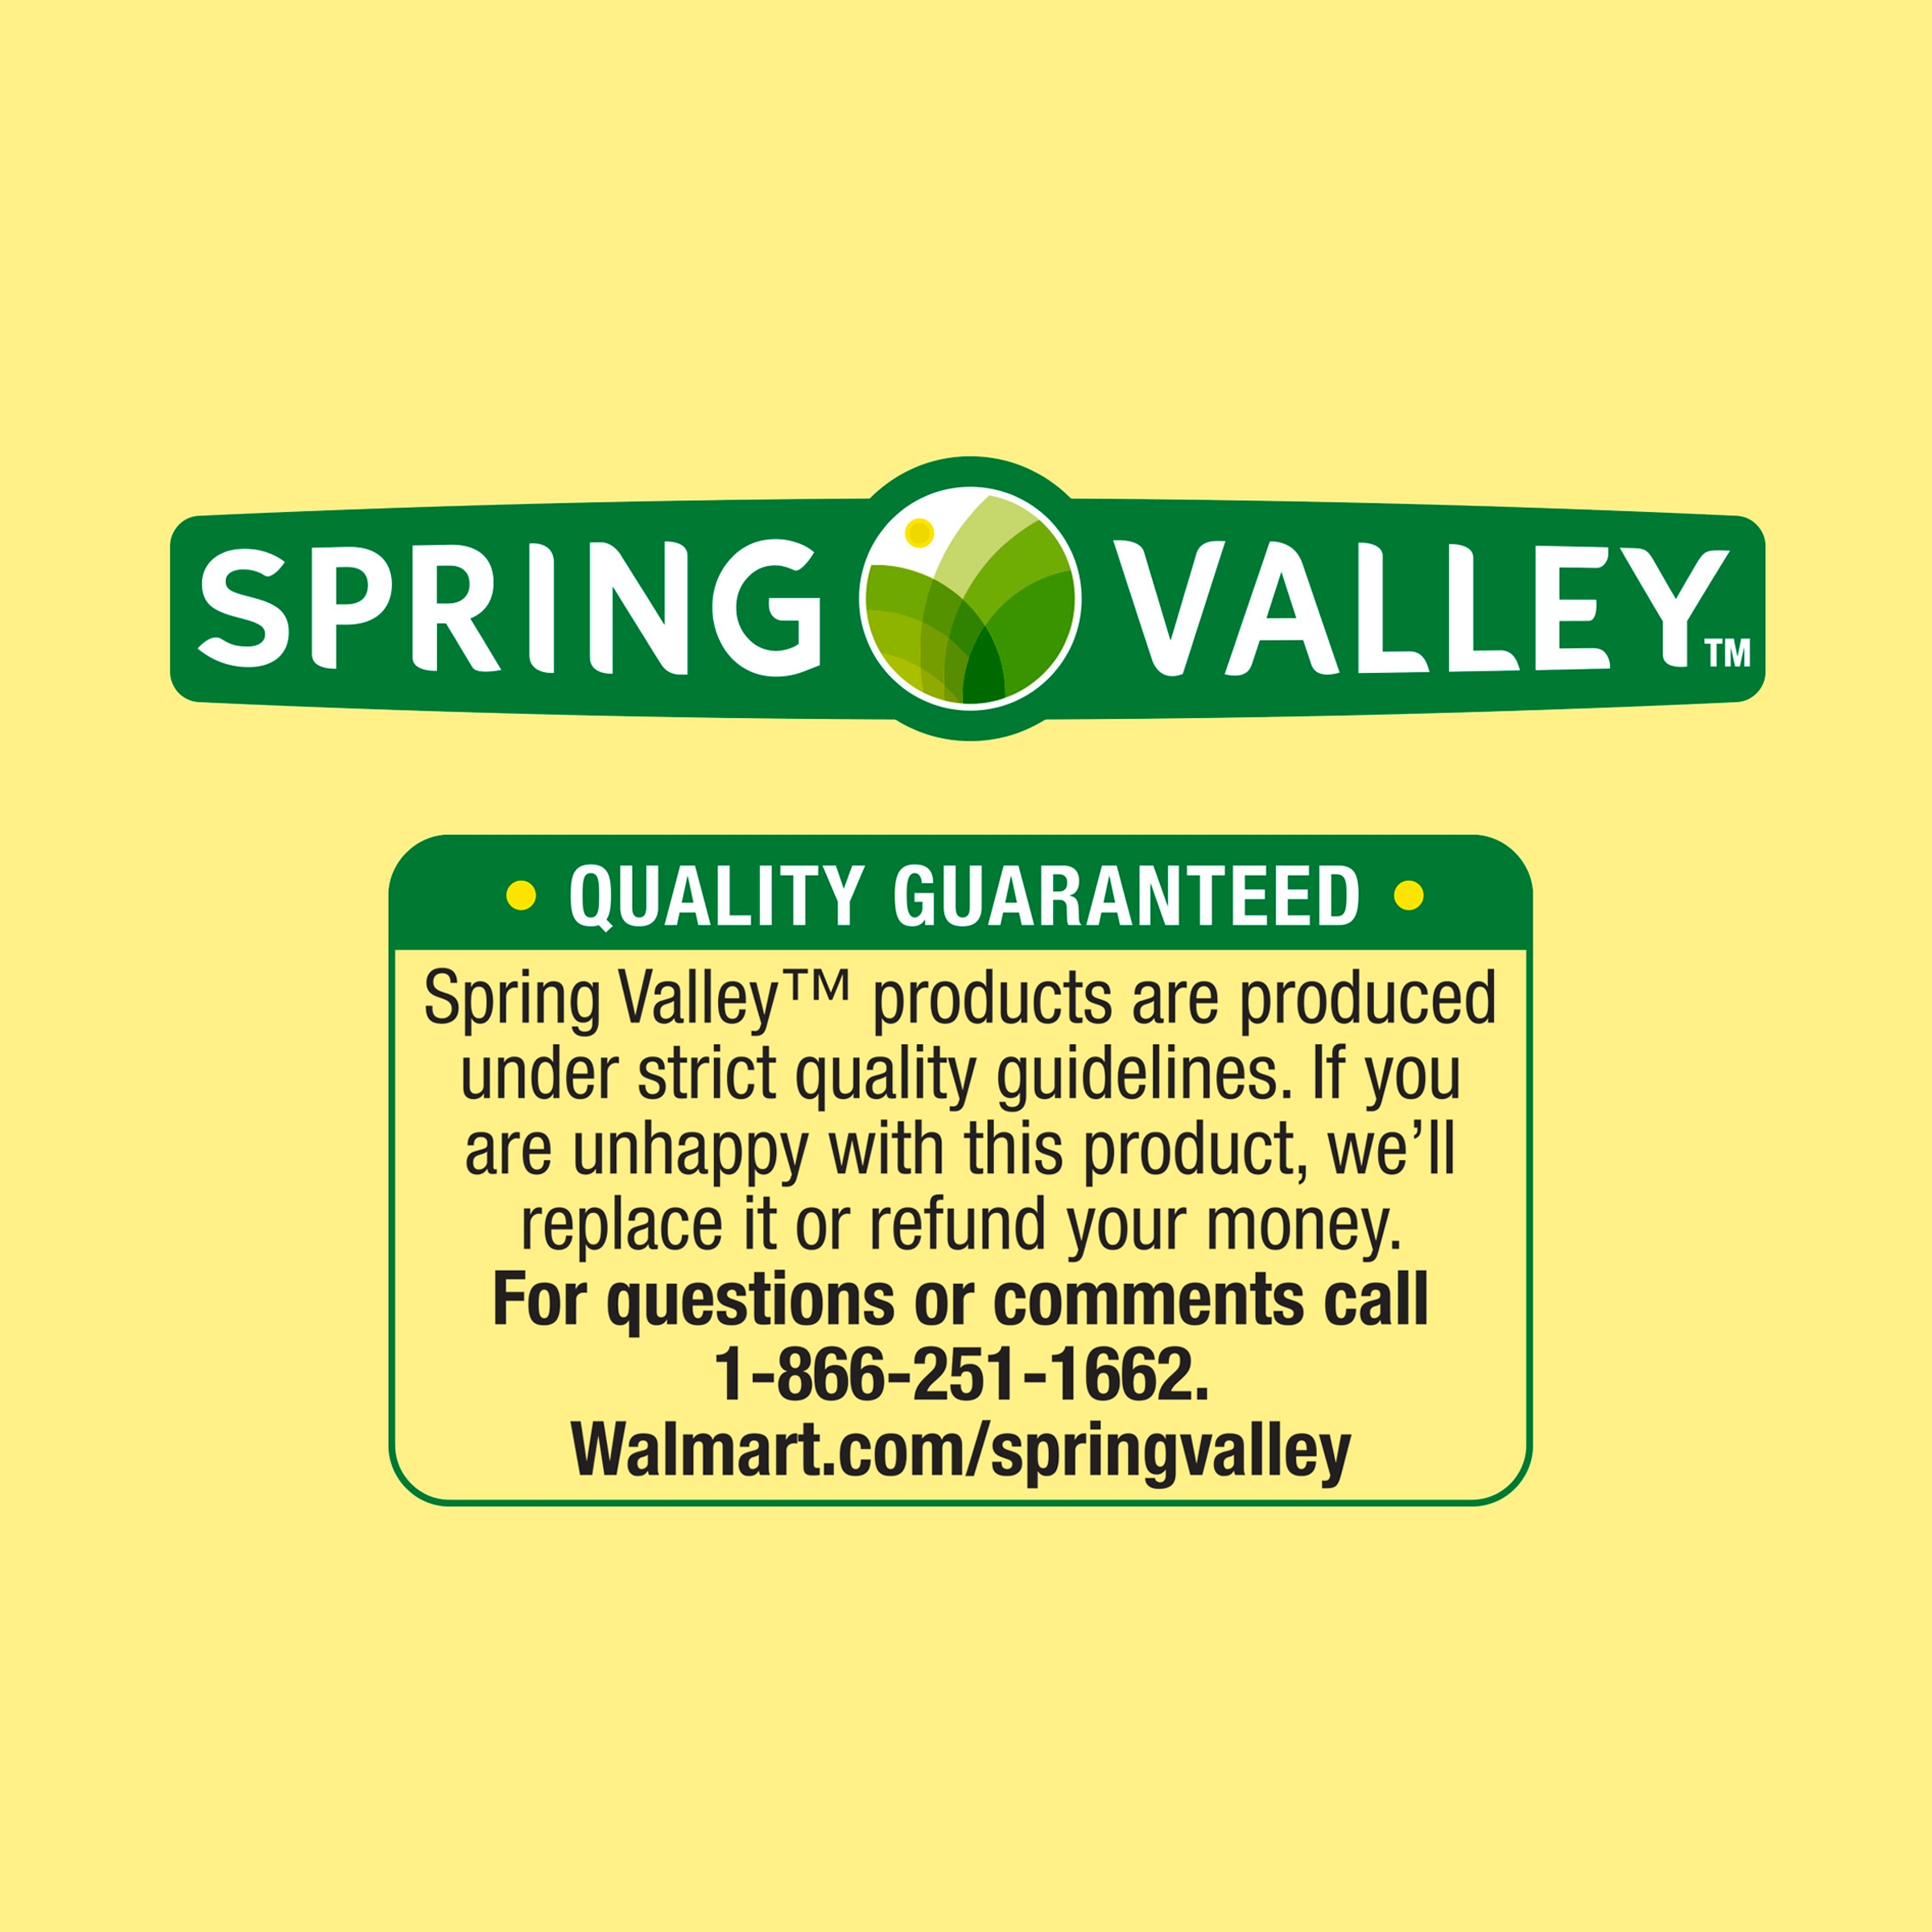 Spring Valley Vitamin D3 Softgels, 25mcg, 1,000 IU, 100 Count, 2 Pack - image 10 of 10